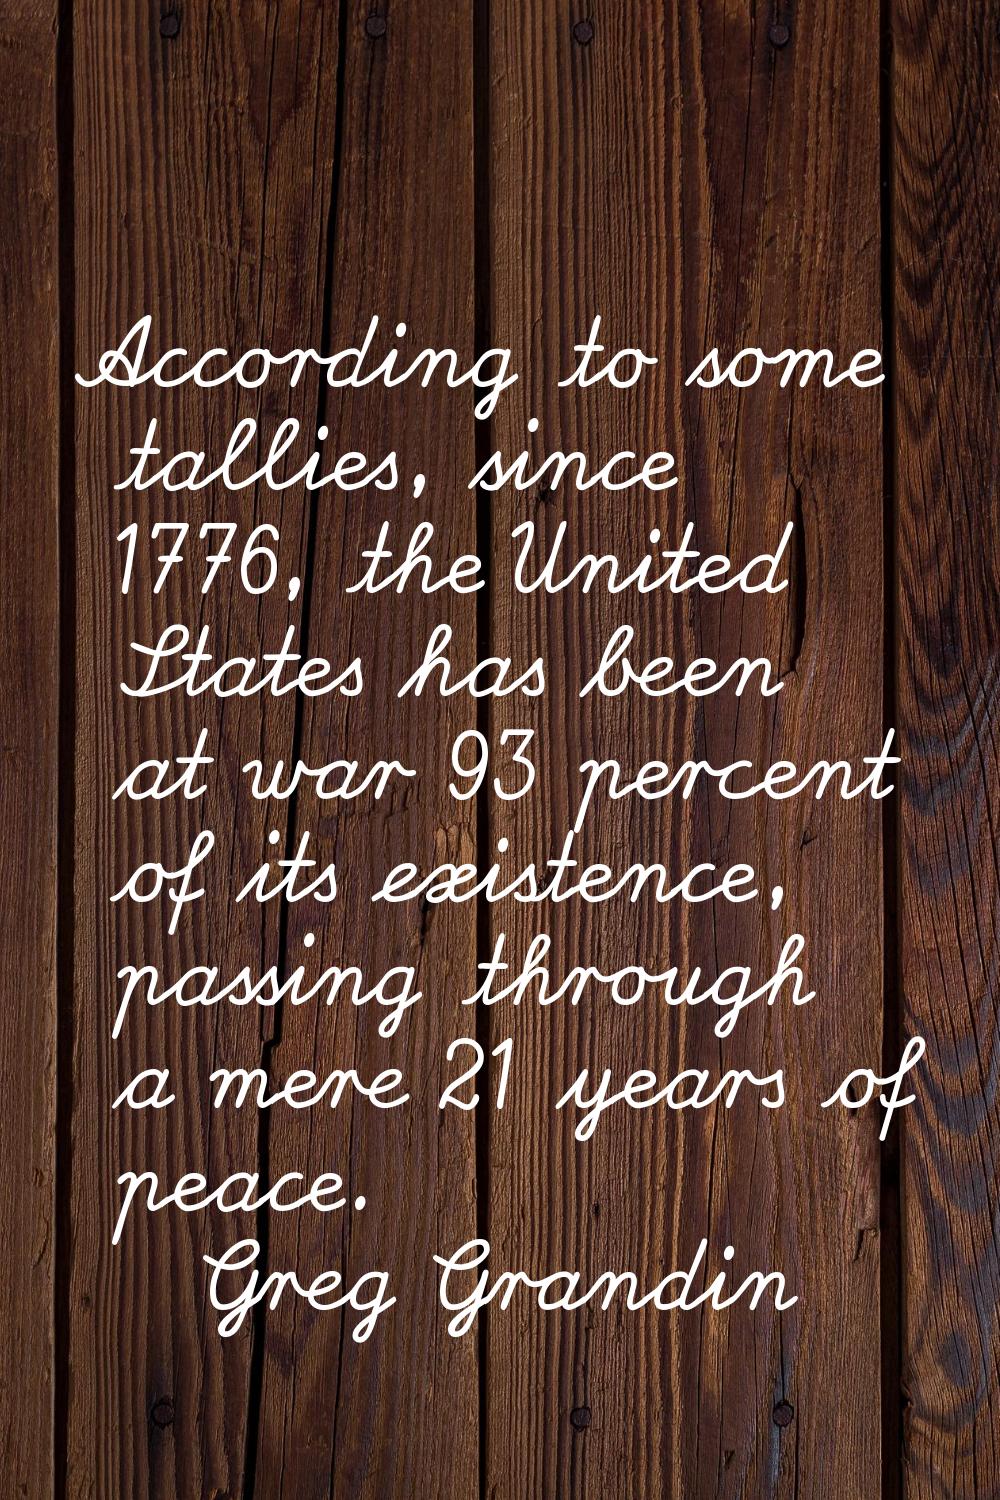 According to some tallies, since 1776, the United States has been at war 93 percent of its existenc